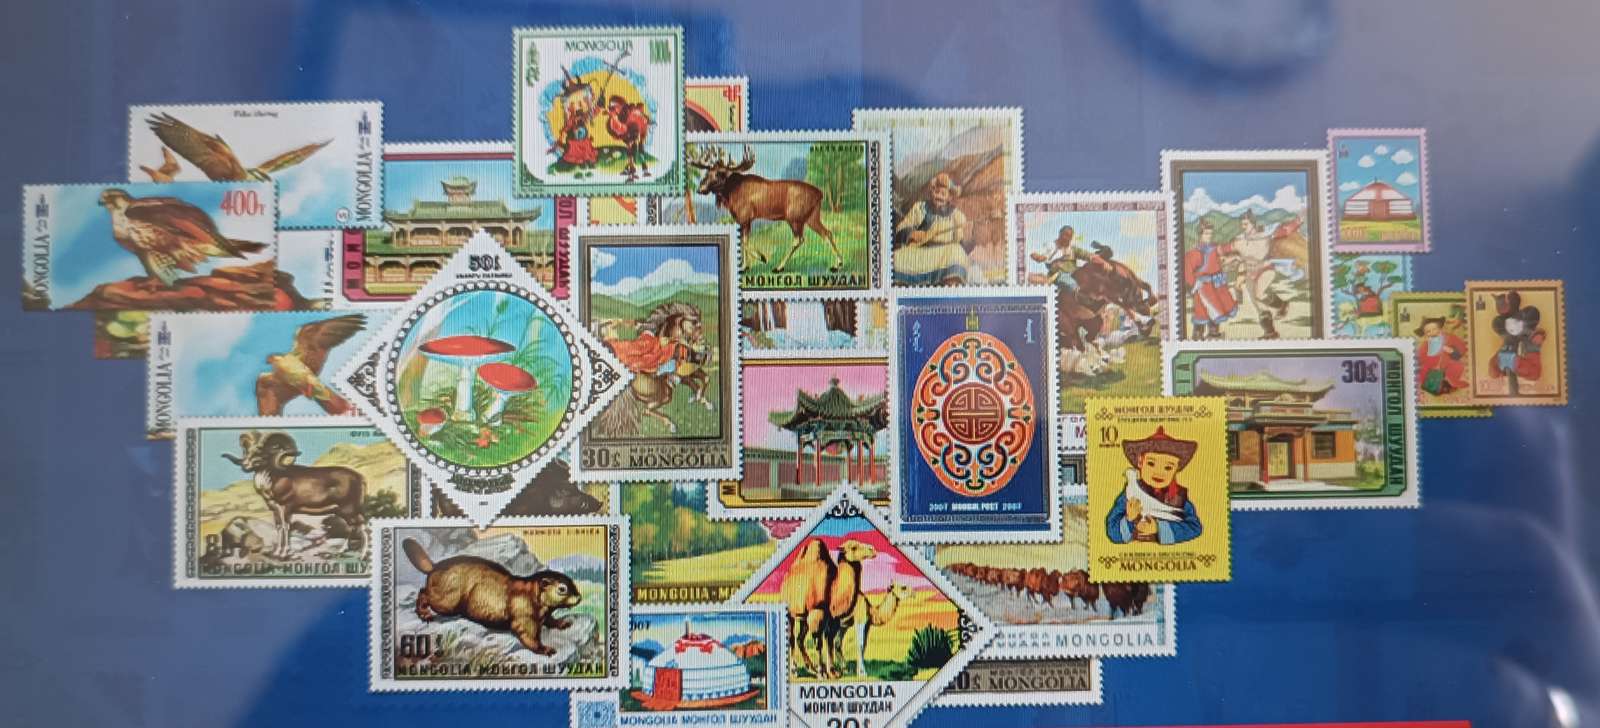 Mongolia stamps puzzle online from photo